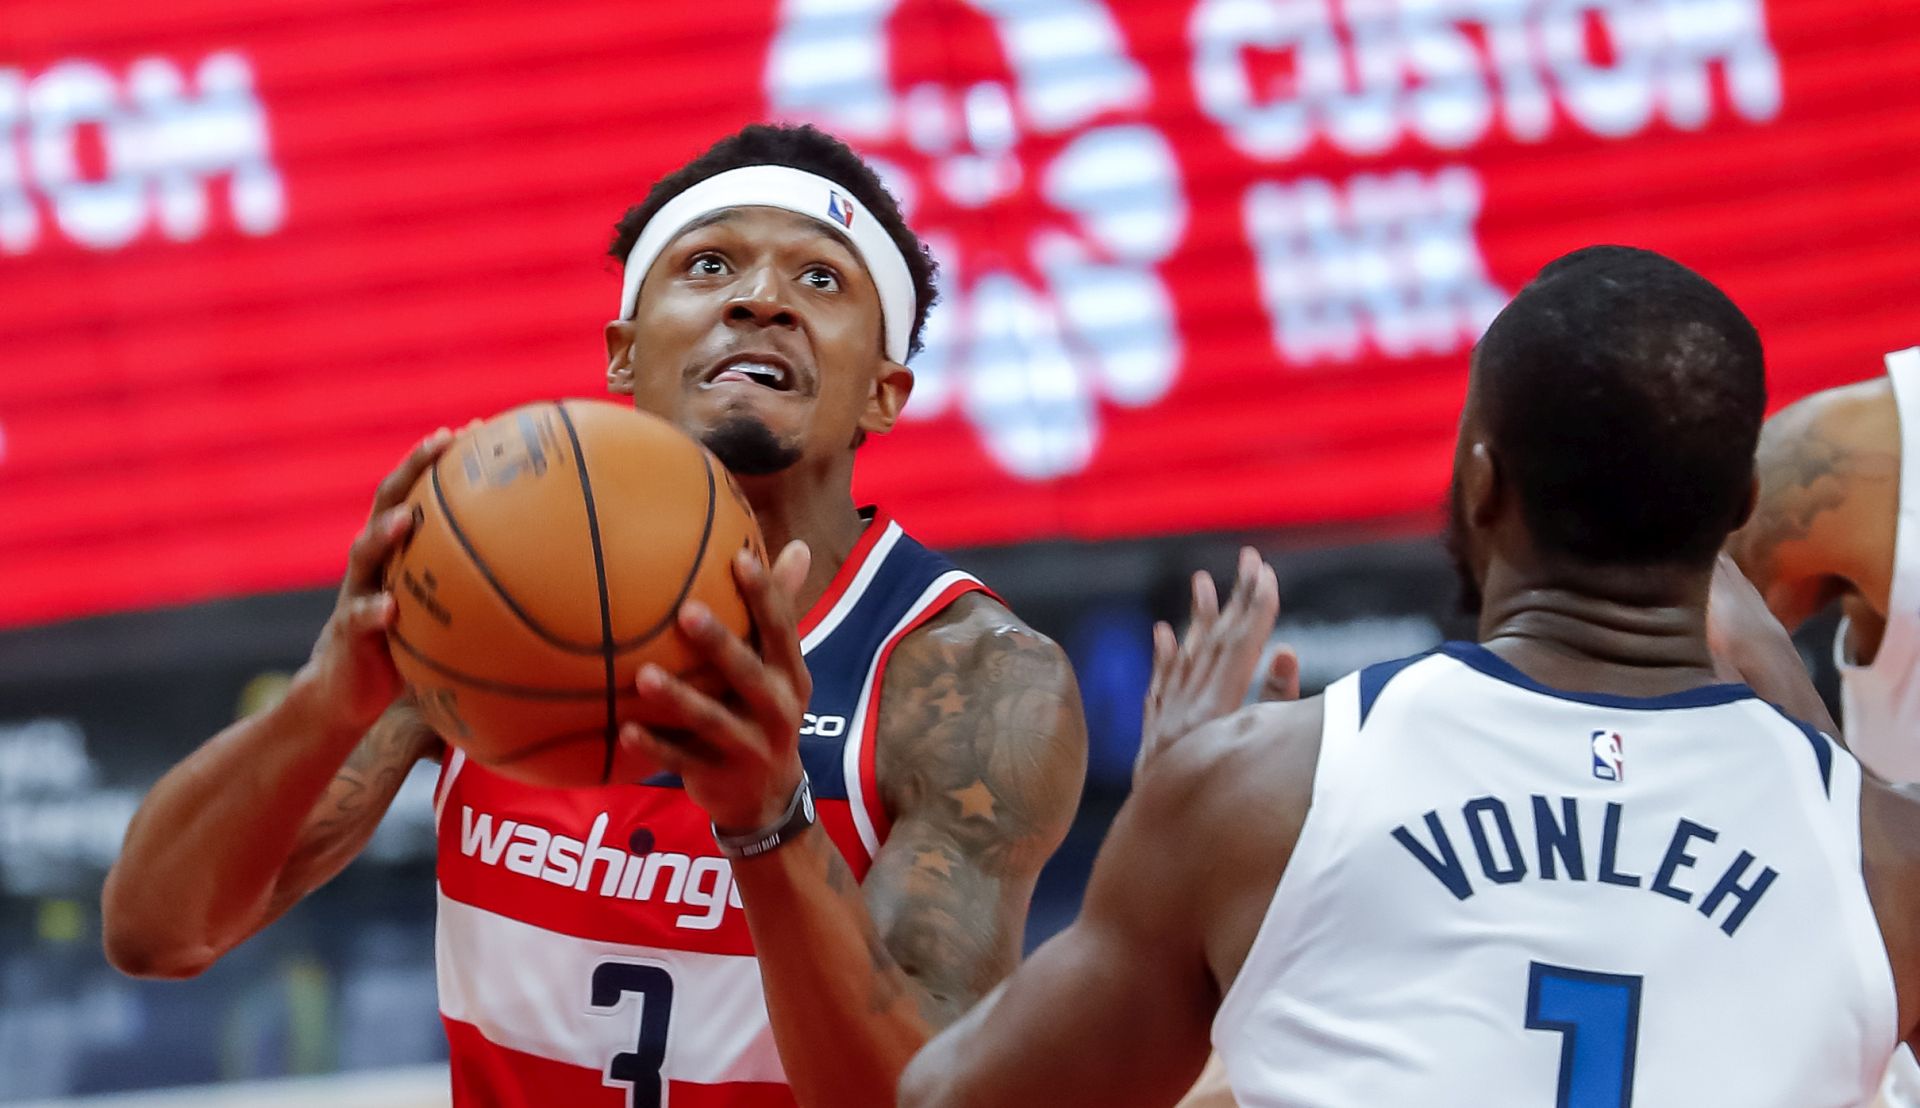 epa07968491 Washington Wizards guard Bradley Beal (L) in action against Minnesota Timberwolves forward Noah Vonleh (R) during the first half of the NBA basketball game between the Minnesota Timberwolves and the Washington Wizards at CapitalOne Arena in Washington, DC, USA, 02 November 2019.  EPA/ERIK S. LESSER SHUTTERSTOCK OUT